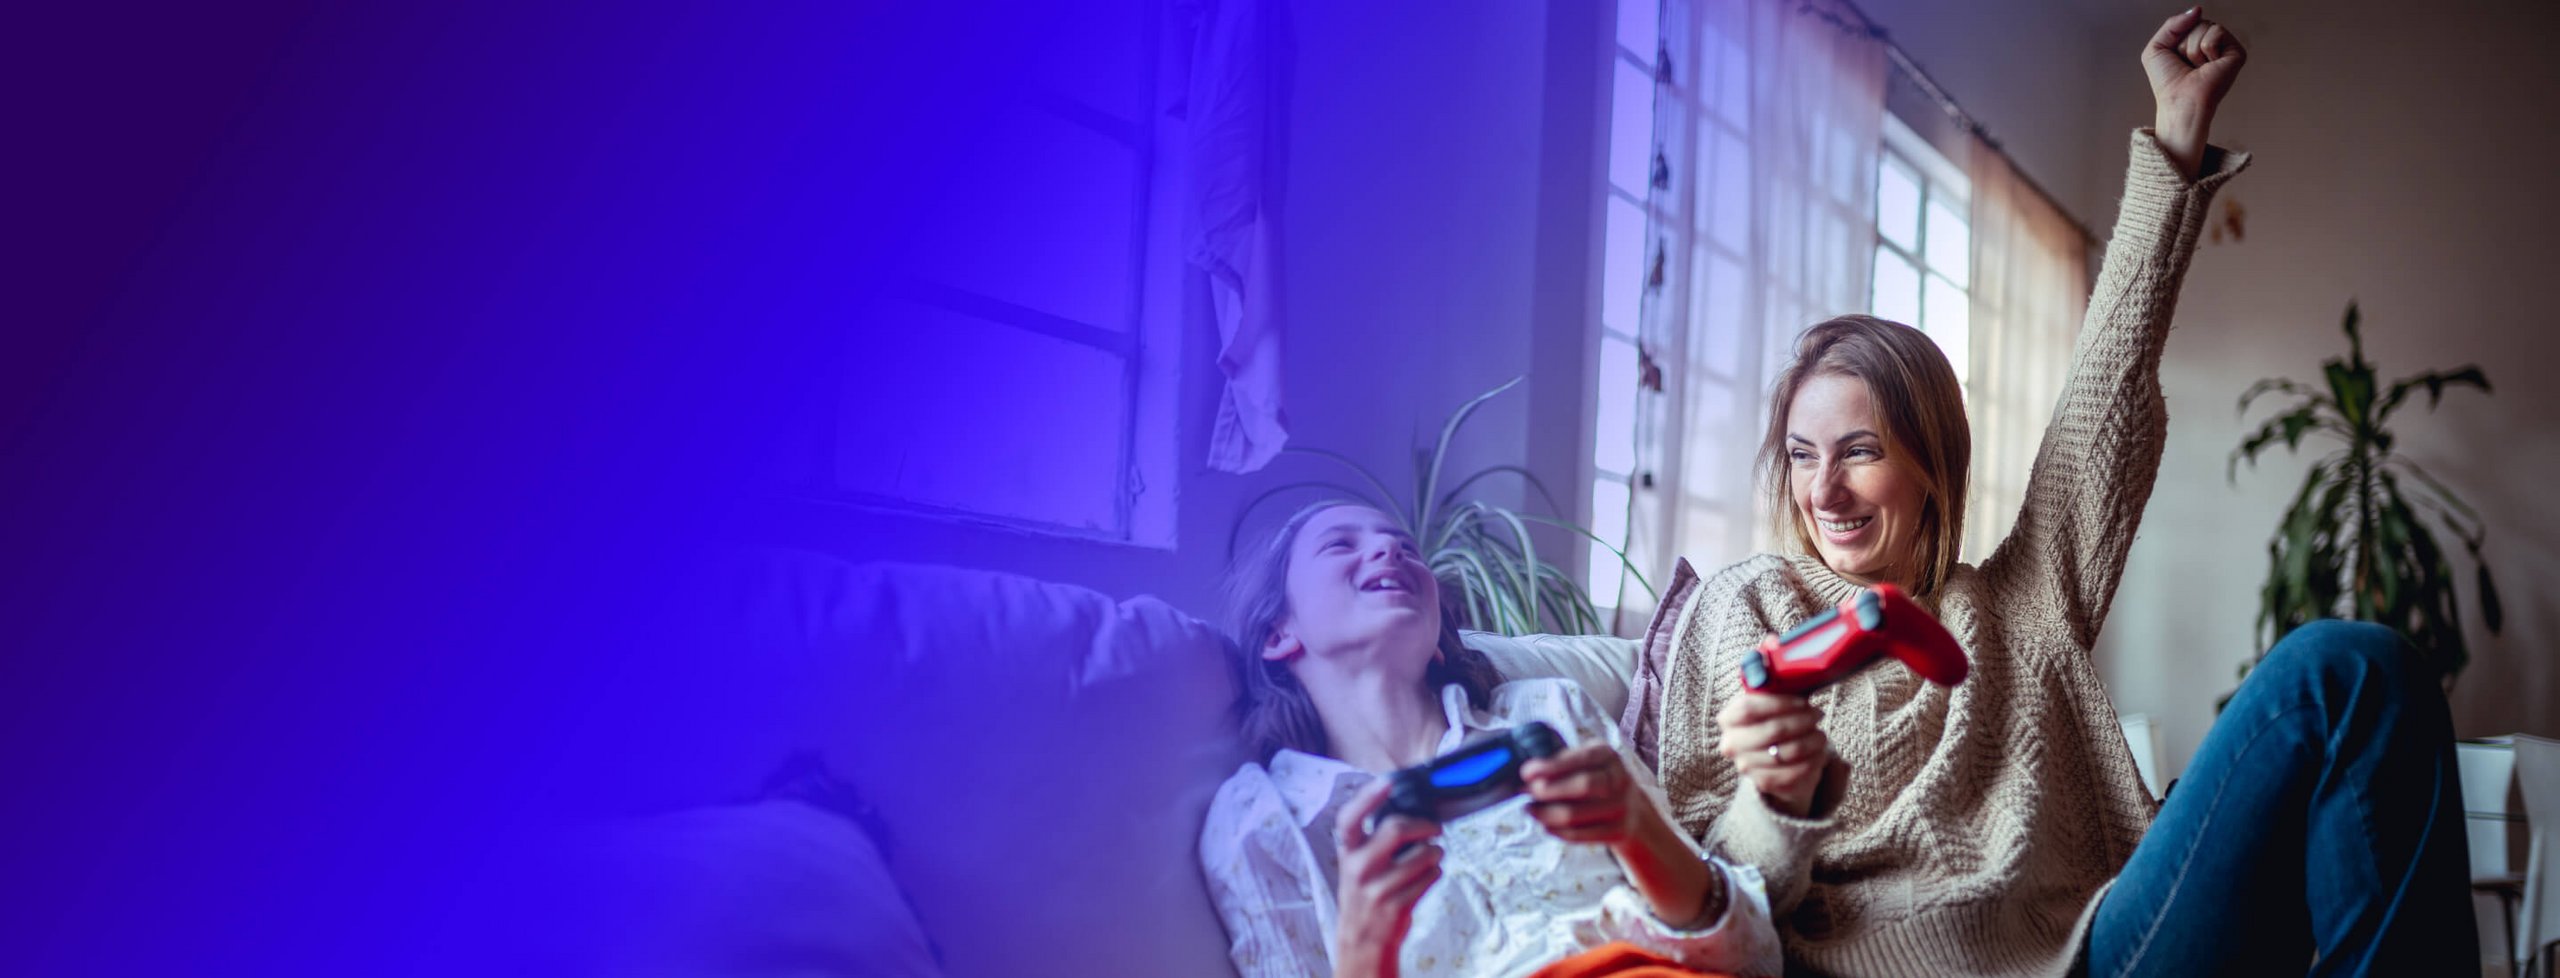 a mother and child playing video games together